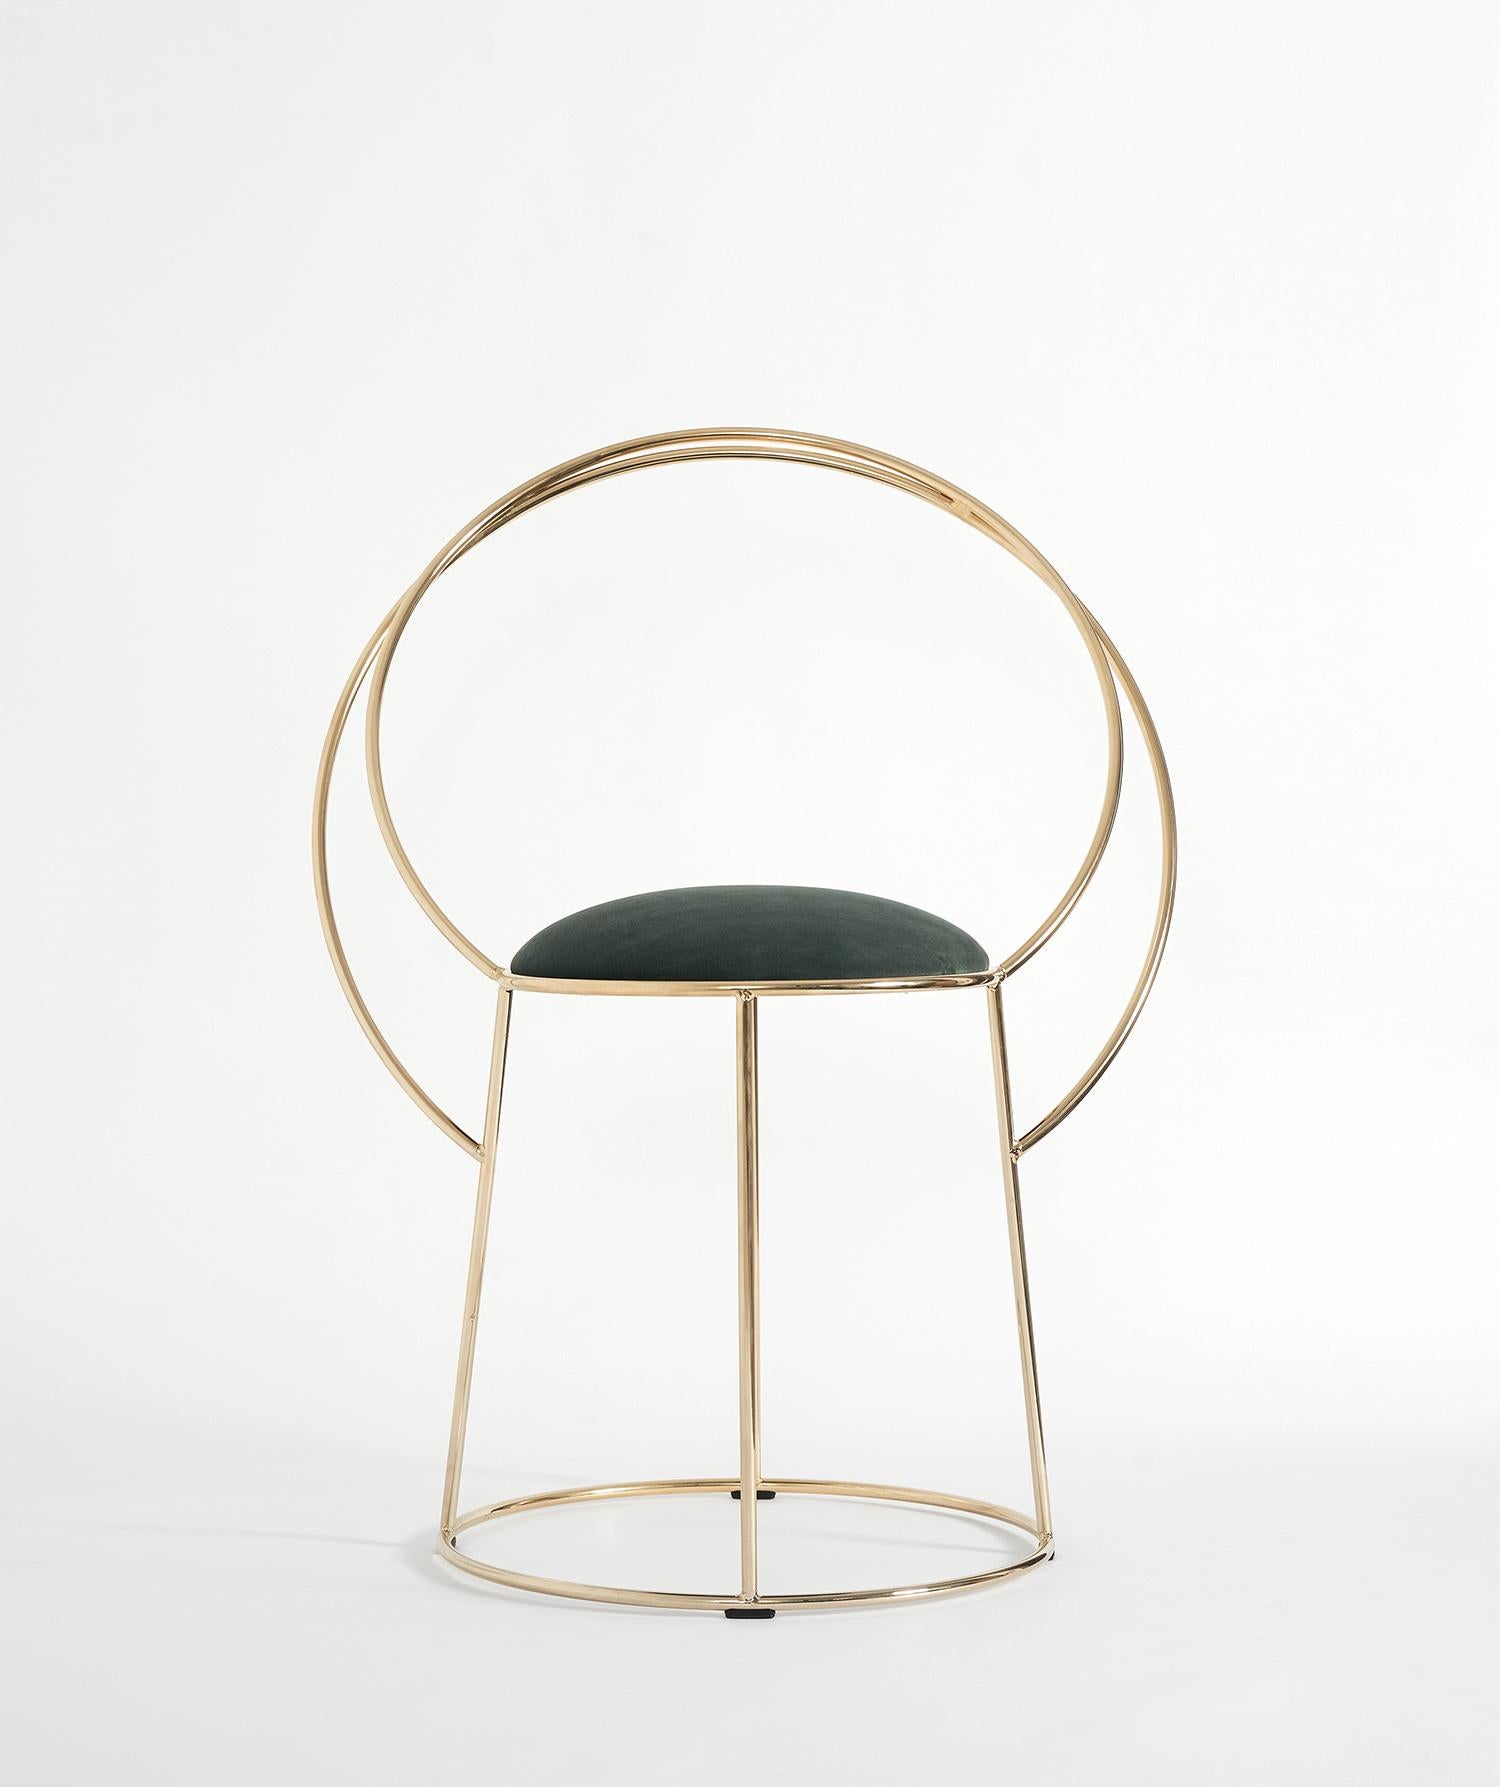 Wire metal draw in the space a deep gesture reconnecting with ancient memorie.
Alis armchair by Enrico Girotti, is the first out of collection of lapiegaWD.
Alis come with a signed Certificate of authenticity Enrico Girotti limited Product.